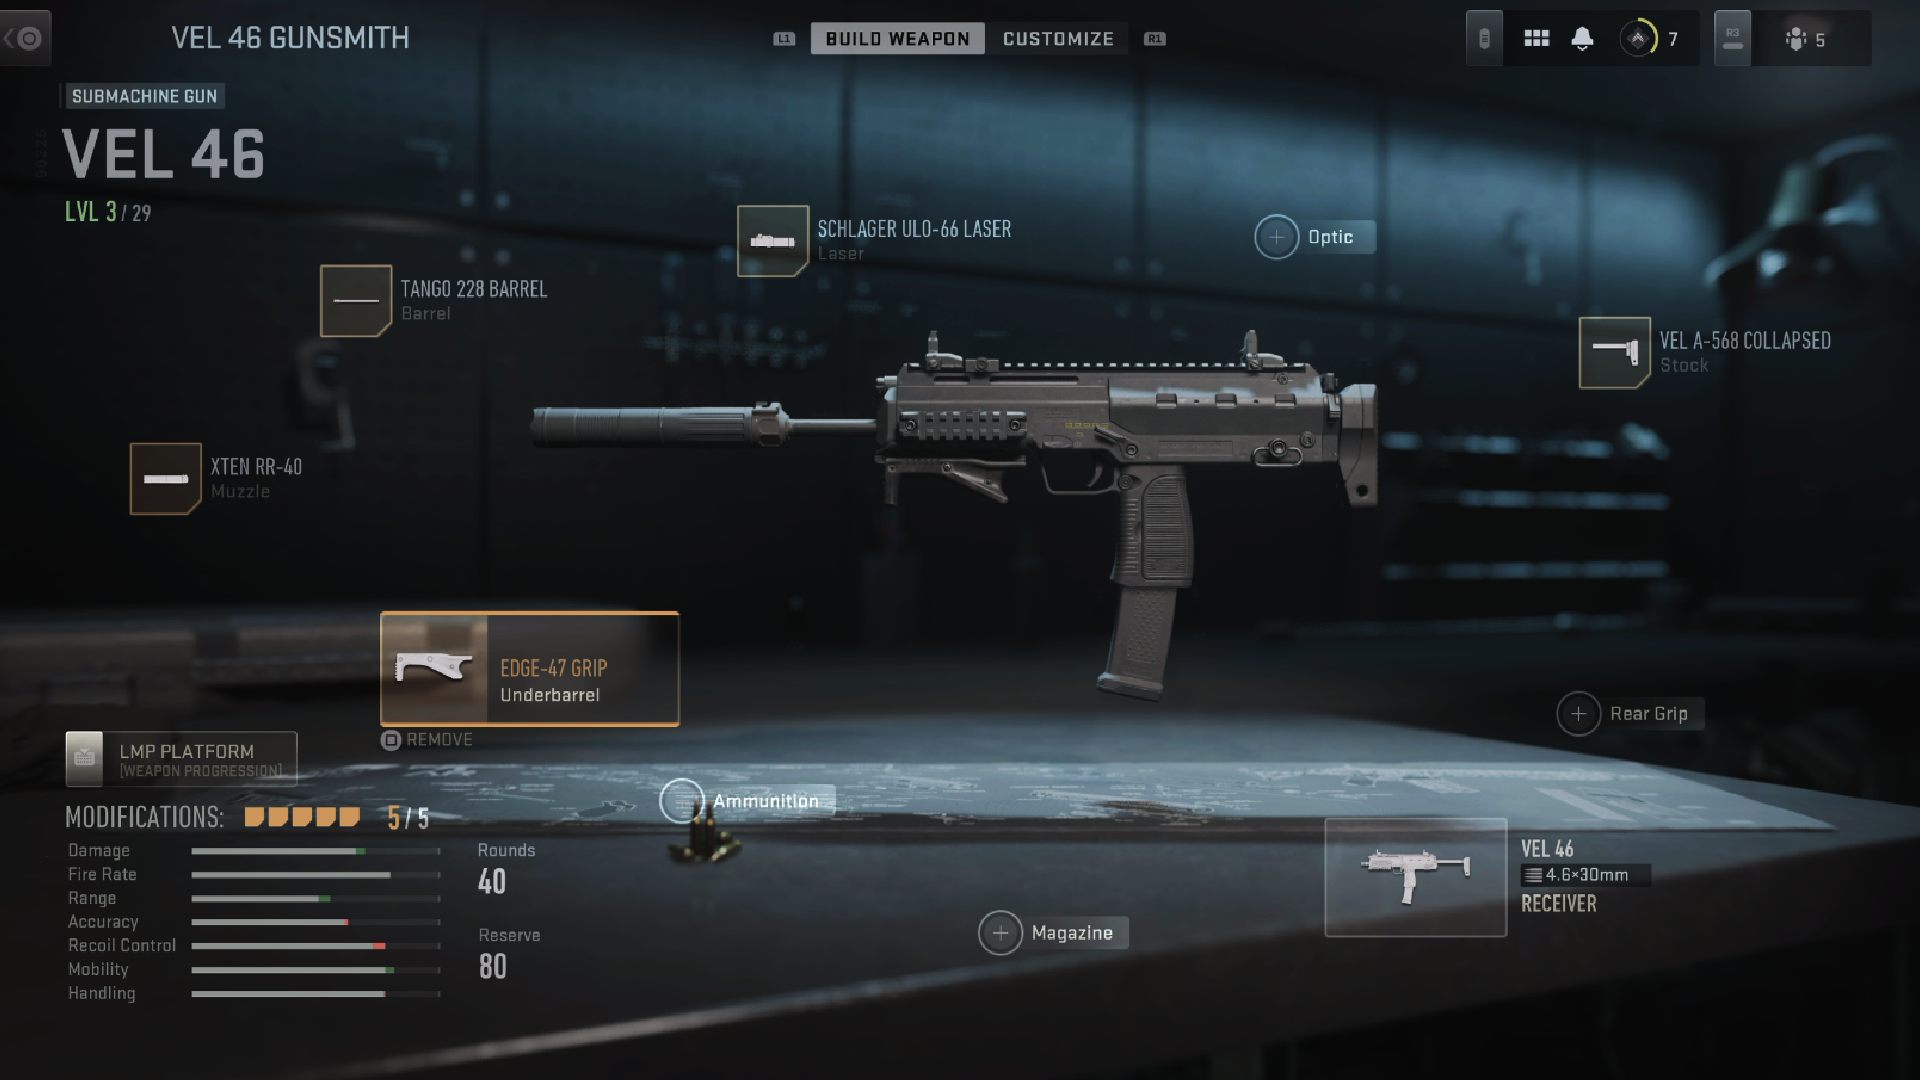 Best Modern Warfare 2 VEL 46 Loadout: The VEL 46 can be seen in the menu with the loadout